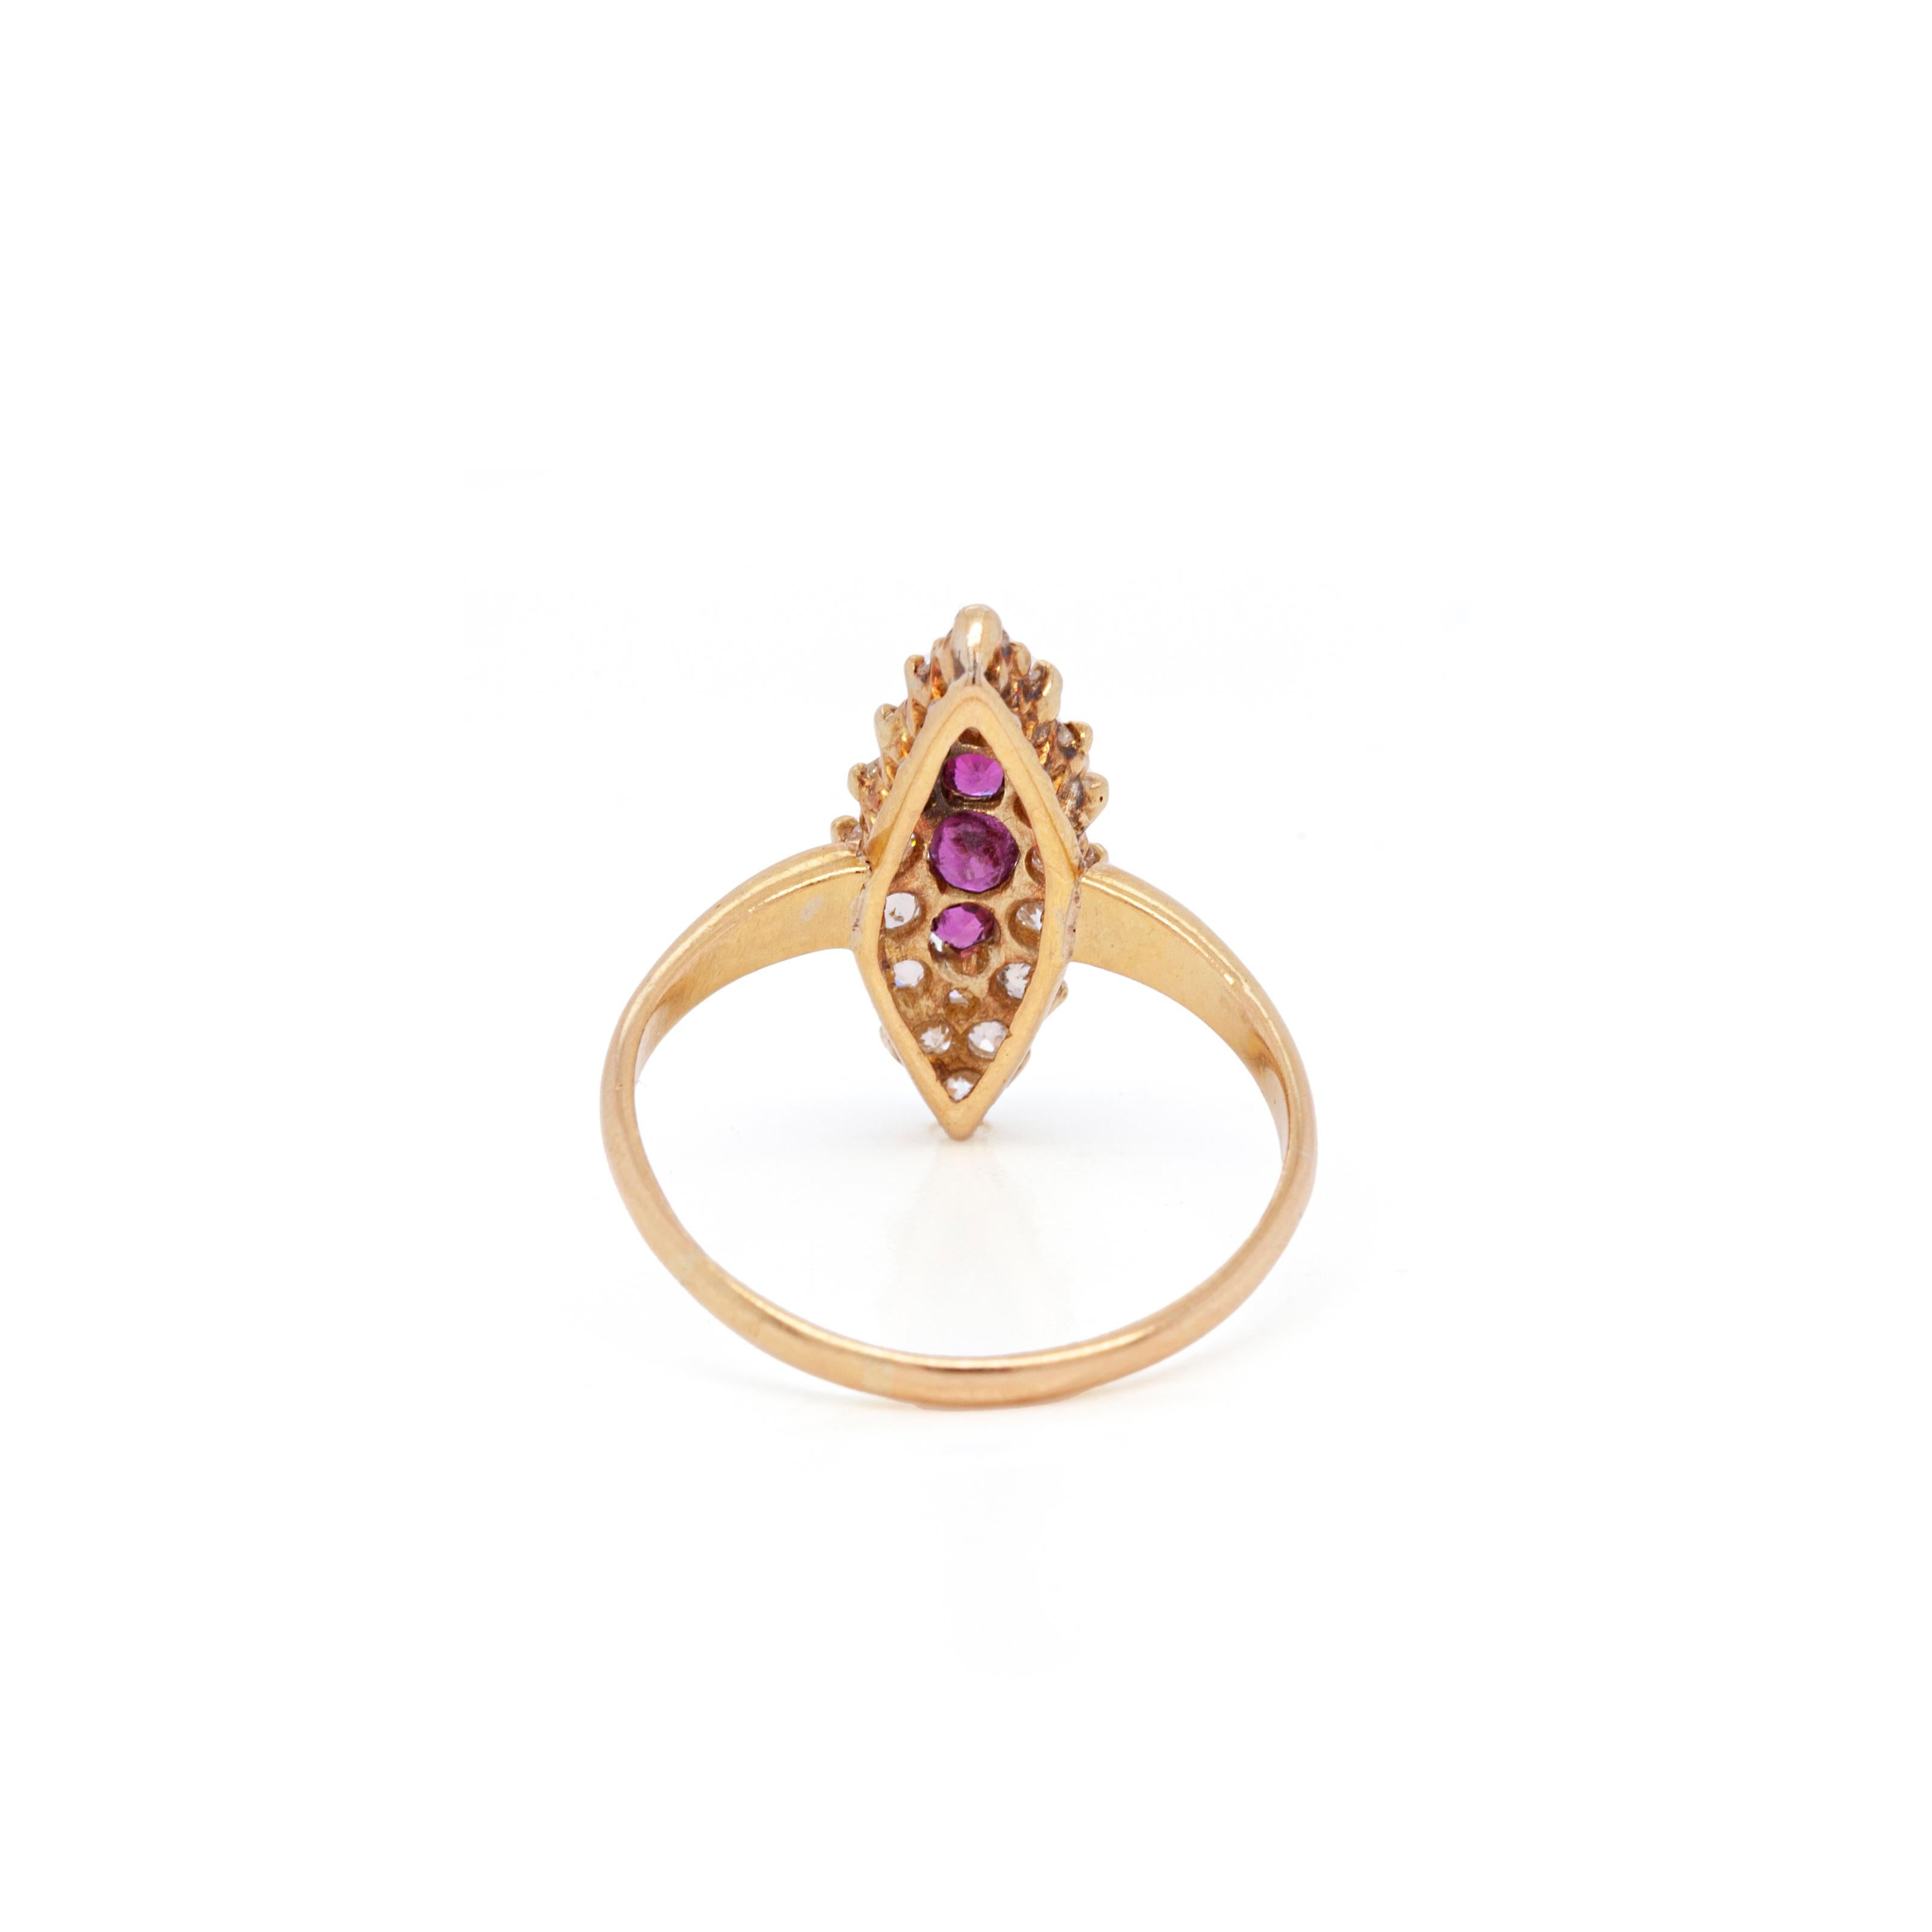 This wonderful antique marquise shaped 18 carat yellow gold ring features 3 lively red round rubies vertically set in the centre, weighing approximately 0.20ct combined. To add extra sparkle, the rubies are beautifully surrounded by 16 old cut